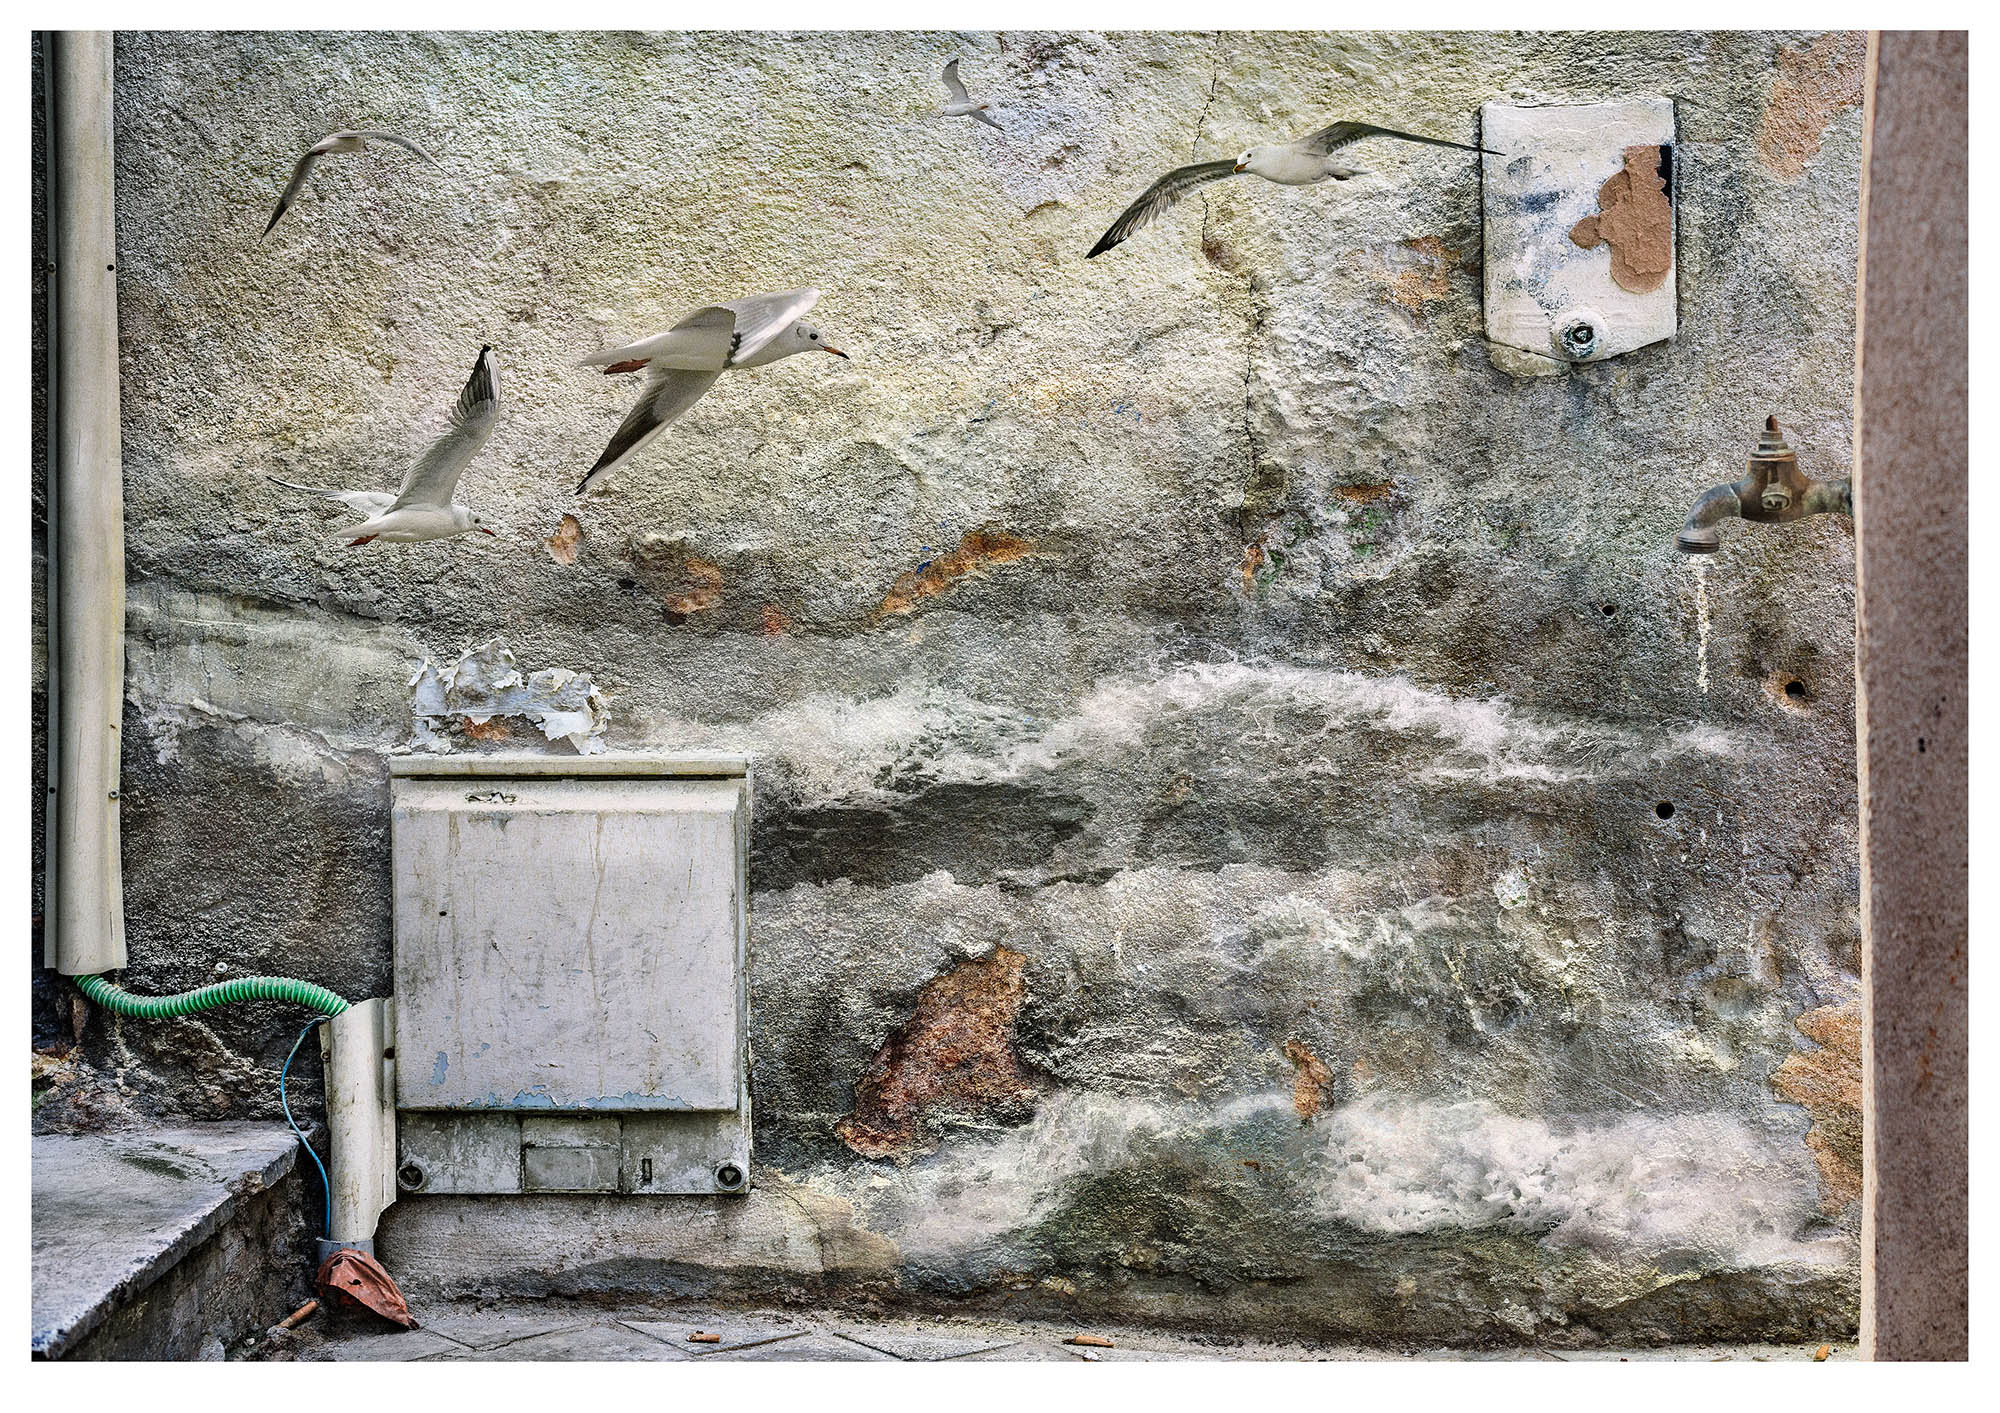 No. 8 last in series: a crumbling wall with elecric junction box is the background to overlaid stormy seas and flying seagulls- illustrates the fear of rising water levels 